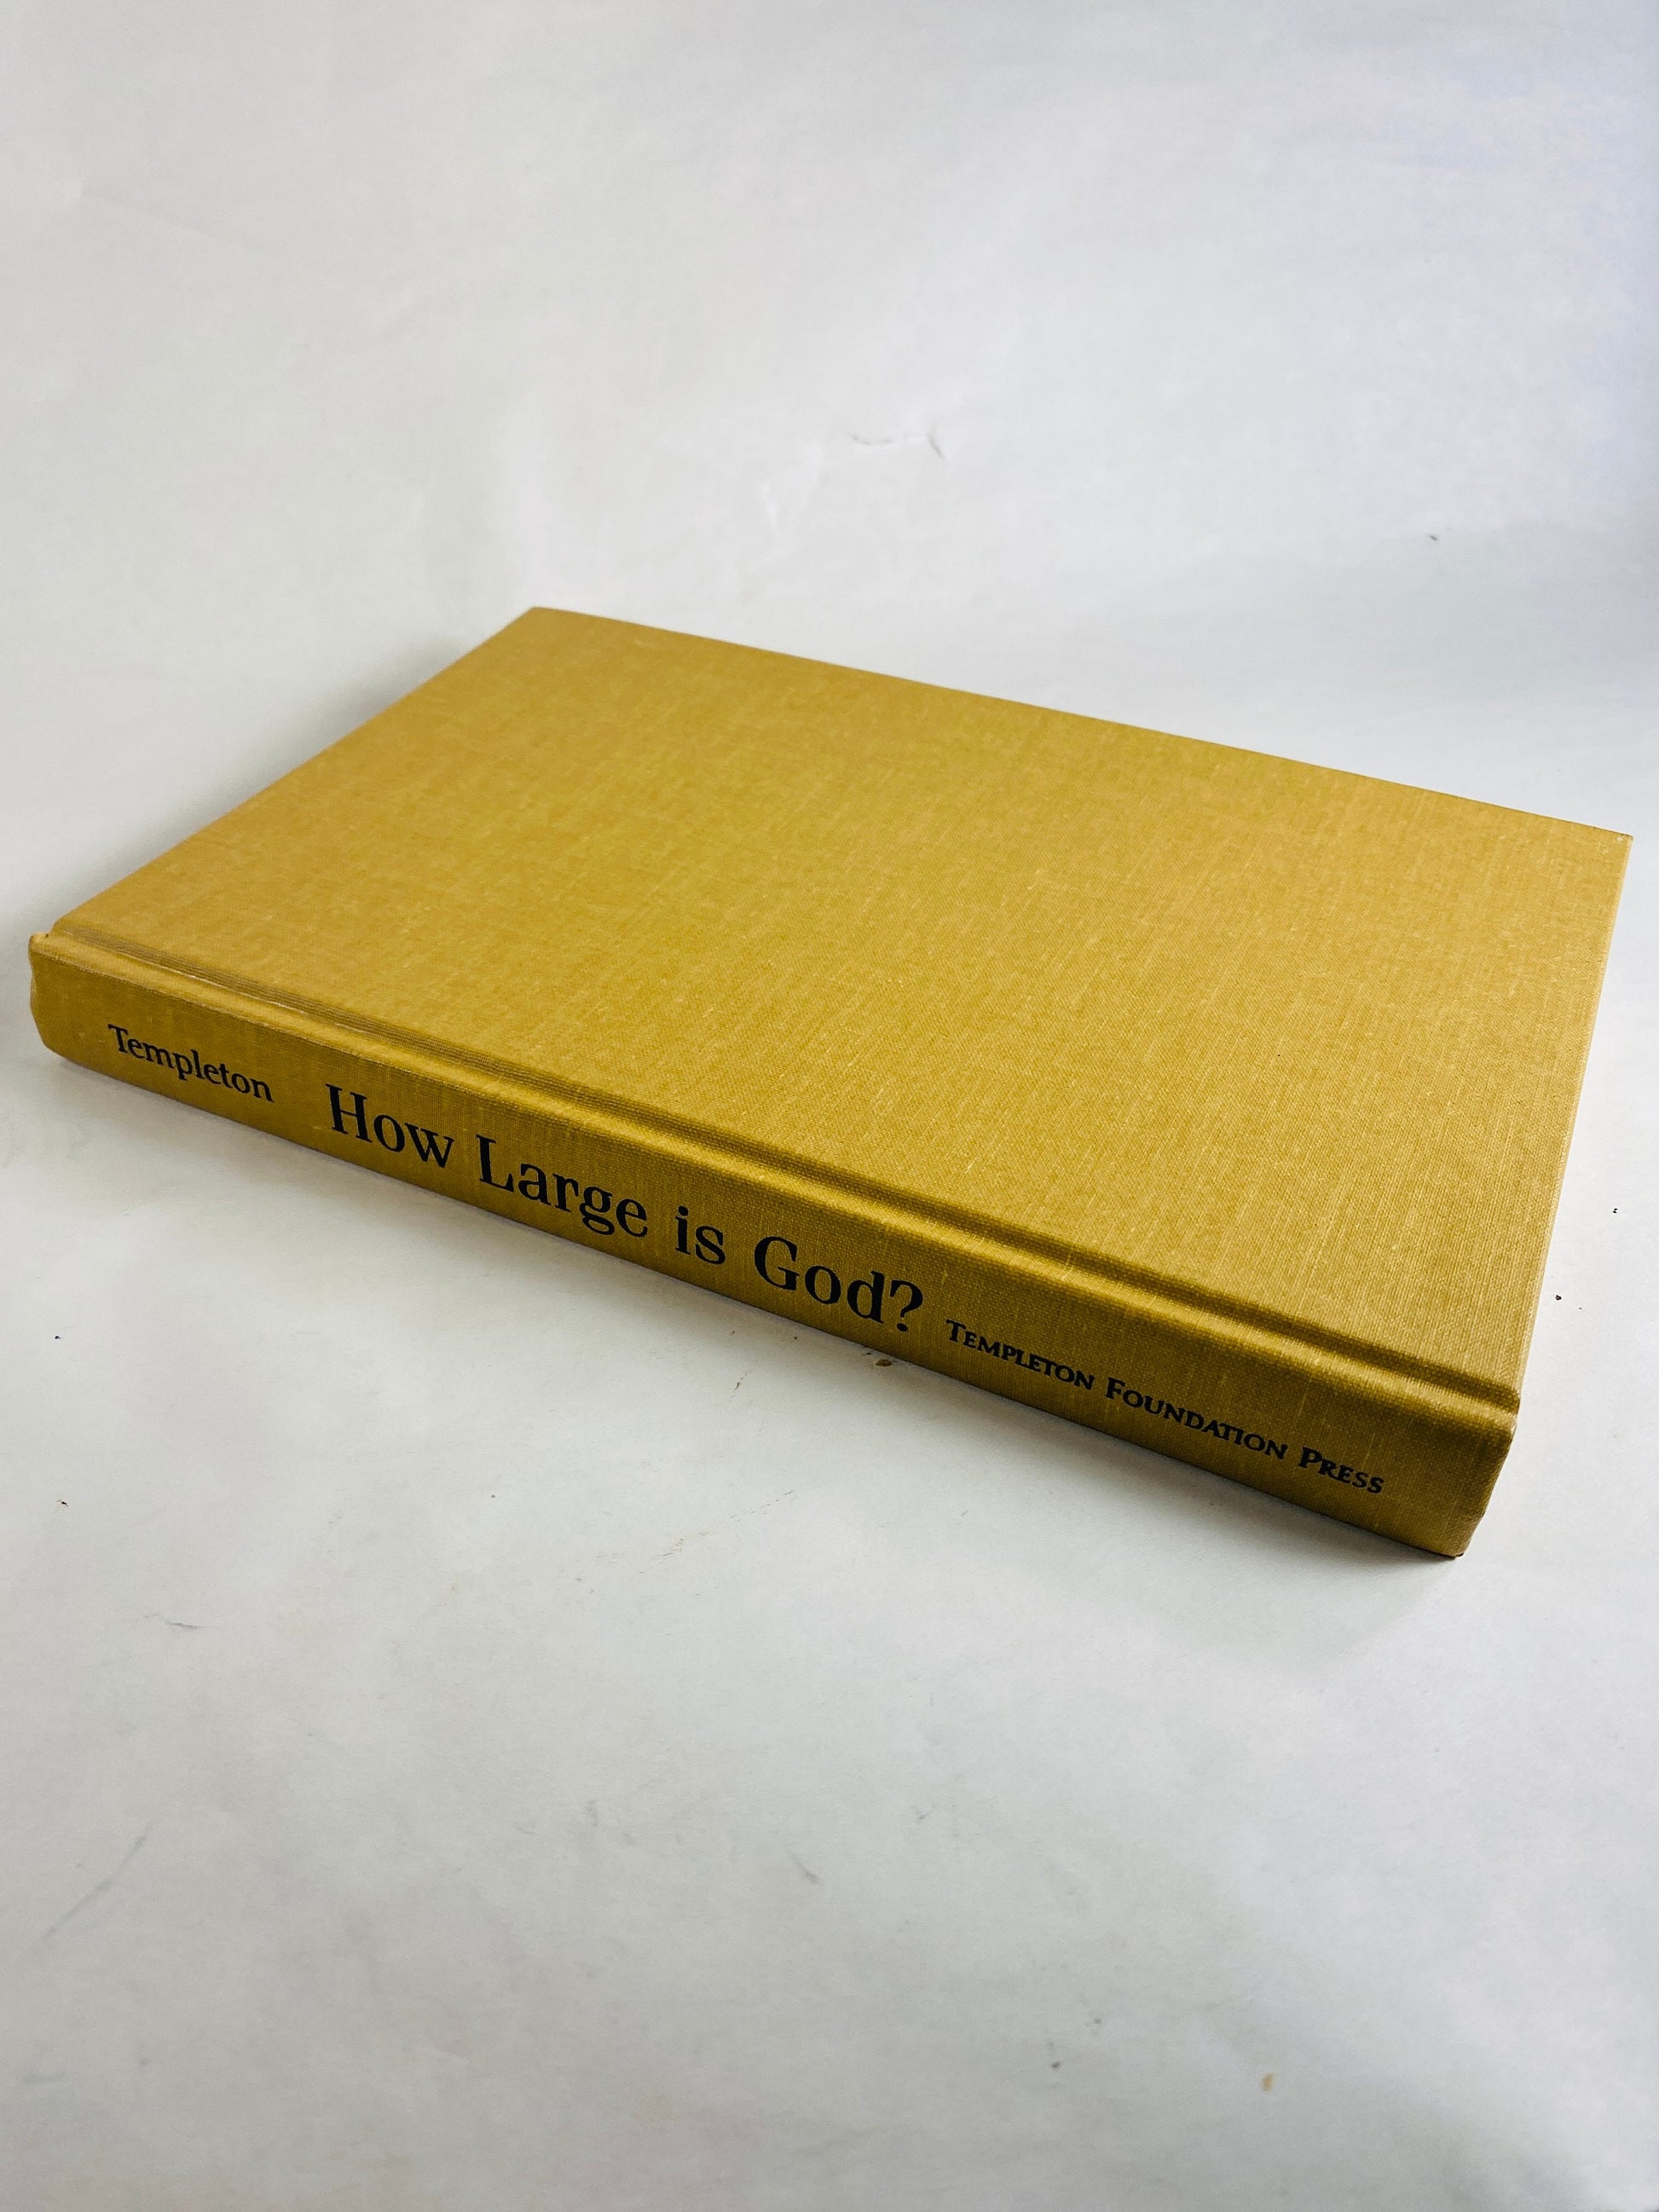 How Large is God vintage book by John Marks Templeton circa 1997 Paradox science theology faith